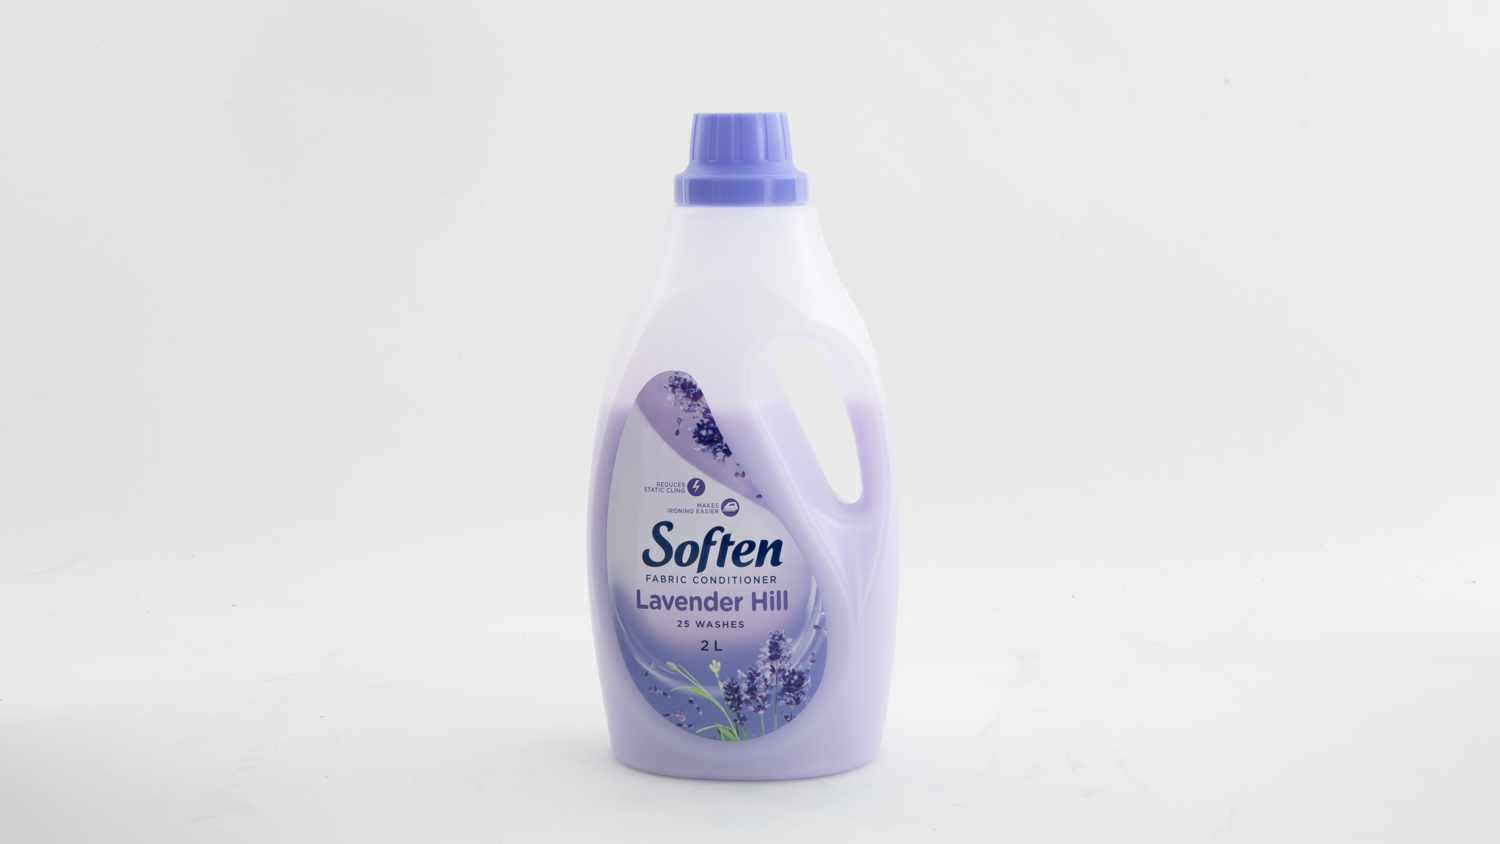 Woolworths Soften Fabric Conditioner Lavender Hill carousel image